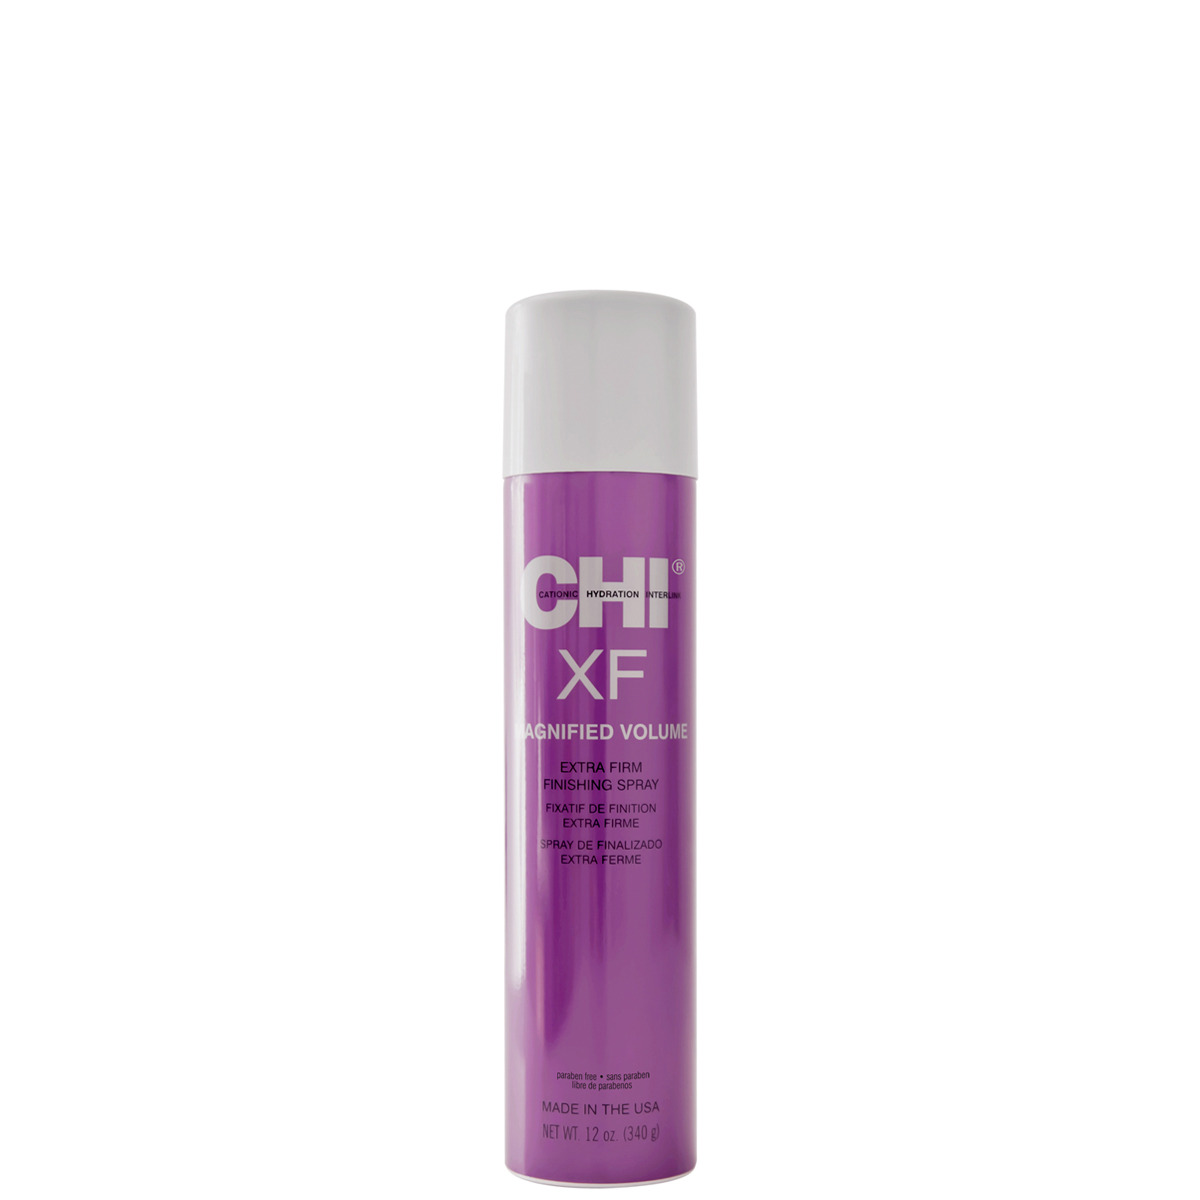 CHI XF Magnified Volume Extra Firm Finishing Hair Spray